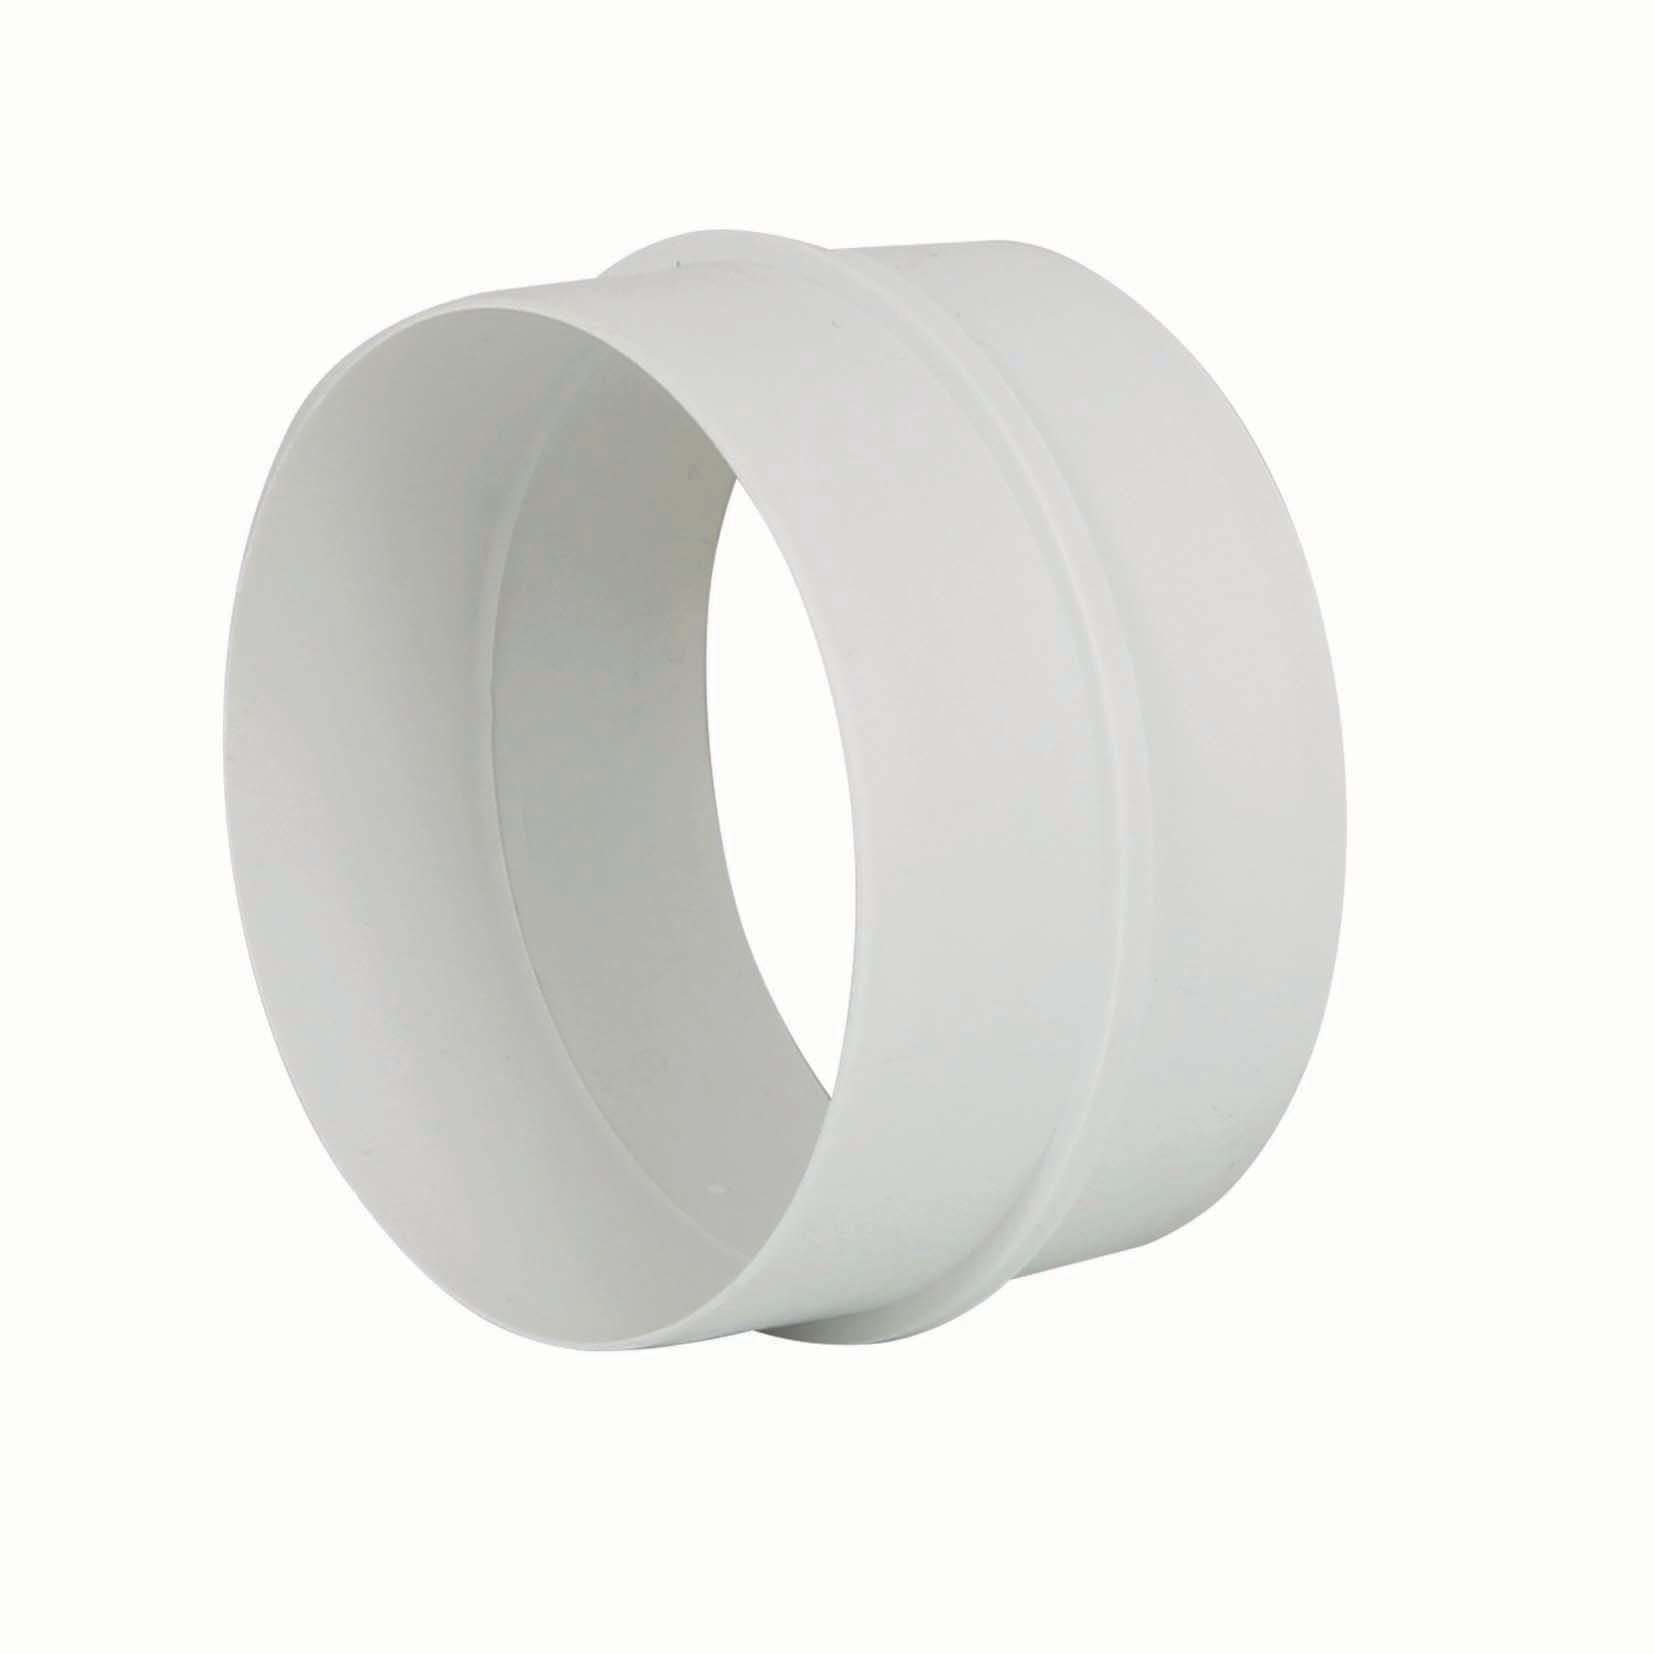 Image of Manrose PVC White Round Pipe Connector - 100mm